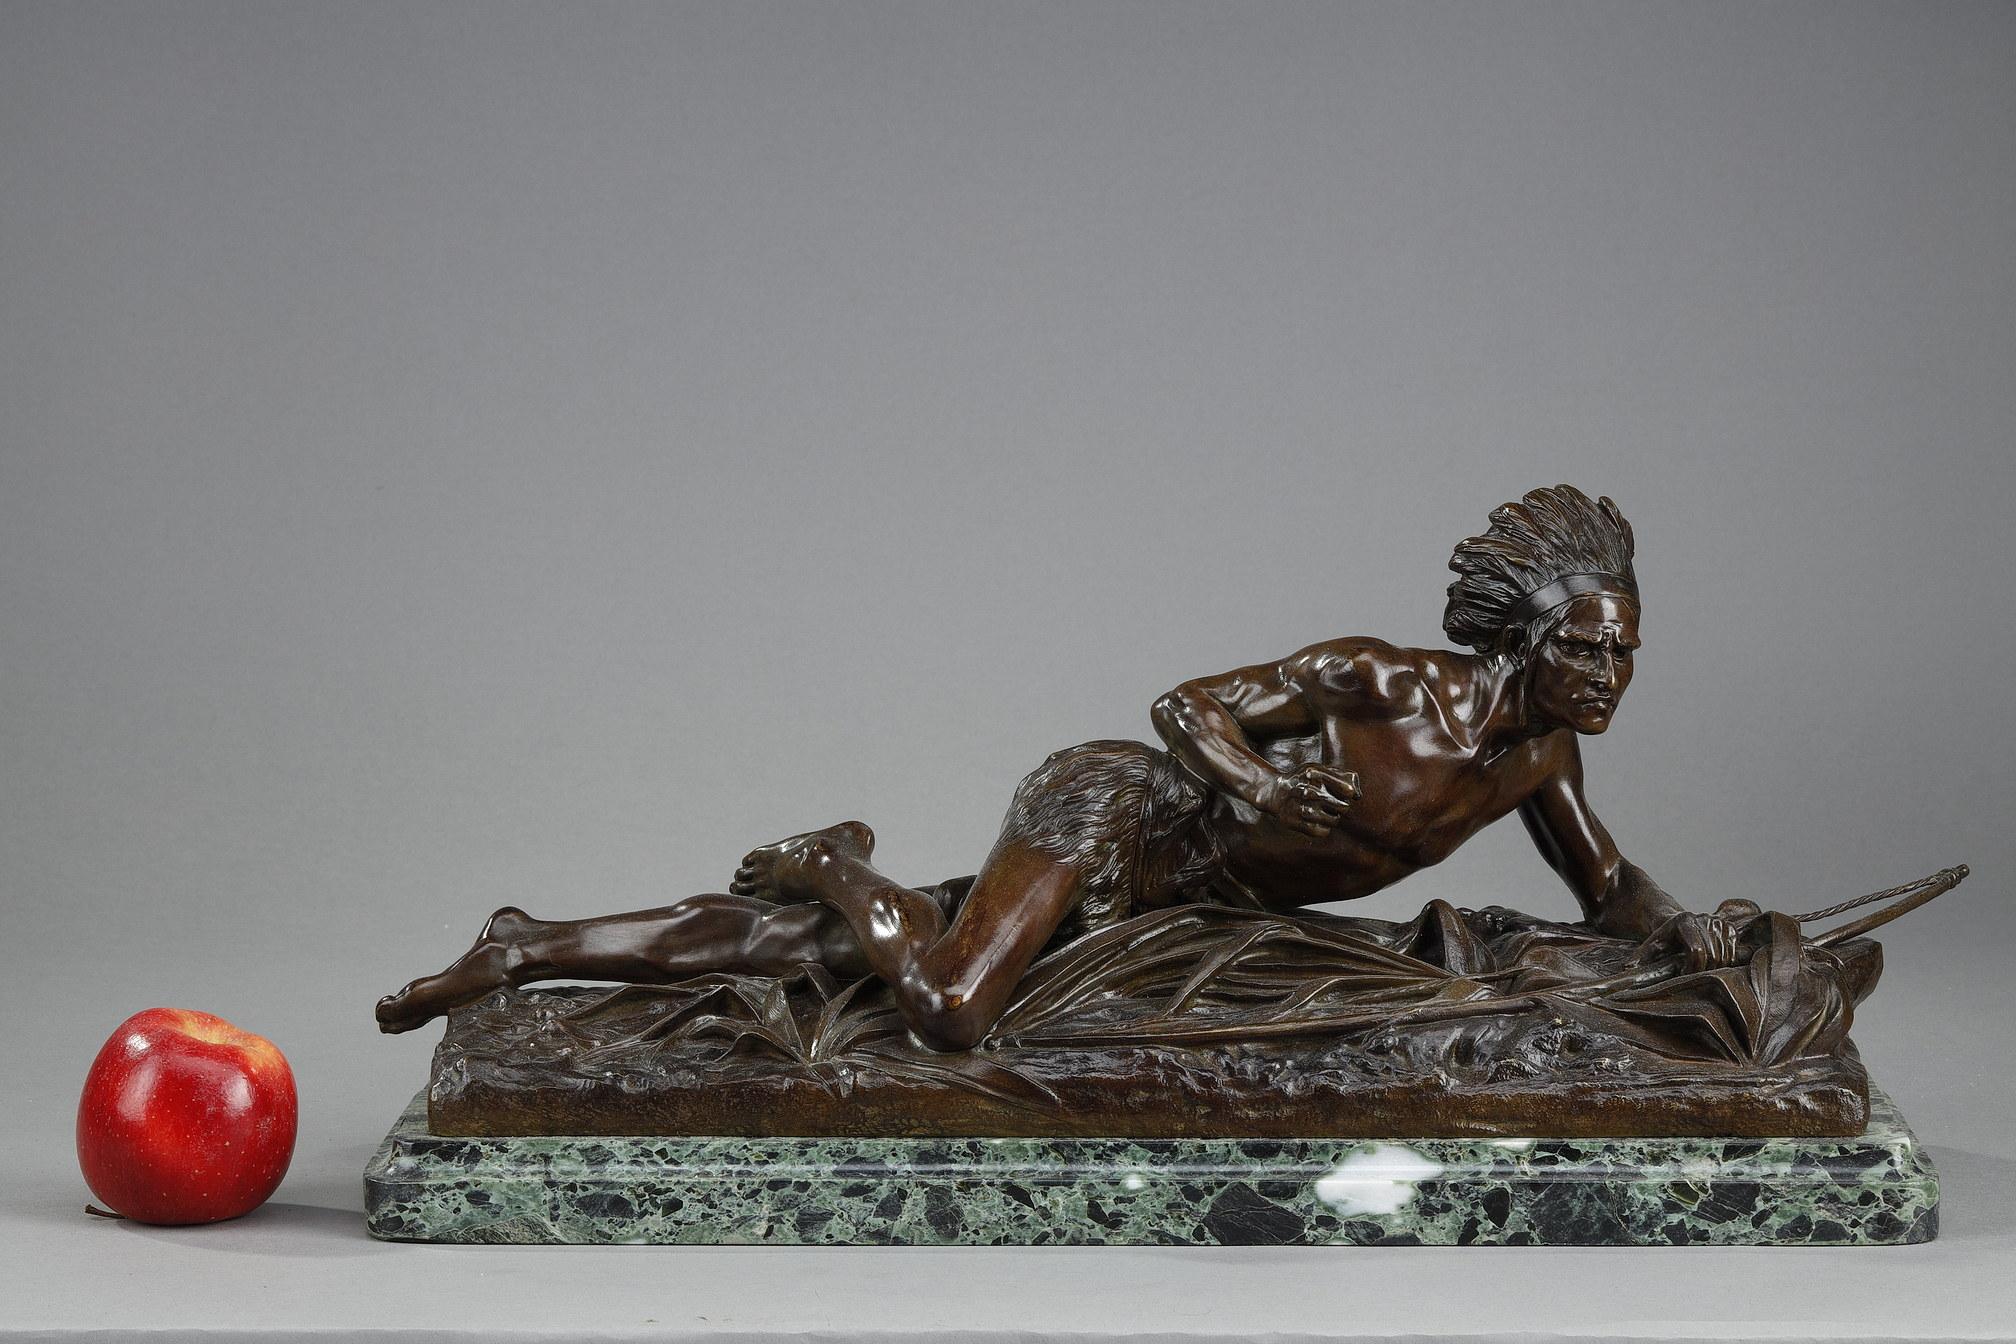 Bronze sculpture of a native American in brown and green patina after Edouard Drouot. It represents a long-haired native American dressed in a hairy loincloth and a feathered headdress lying on the ground. His distant gaze seems focused as he closes